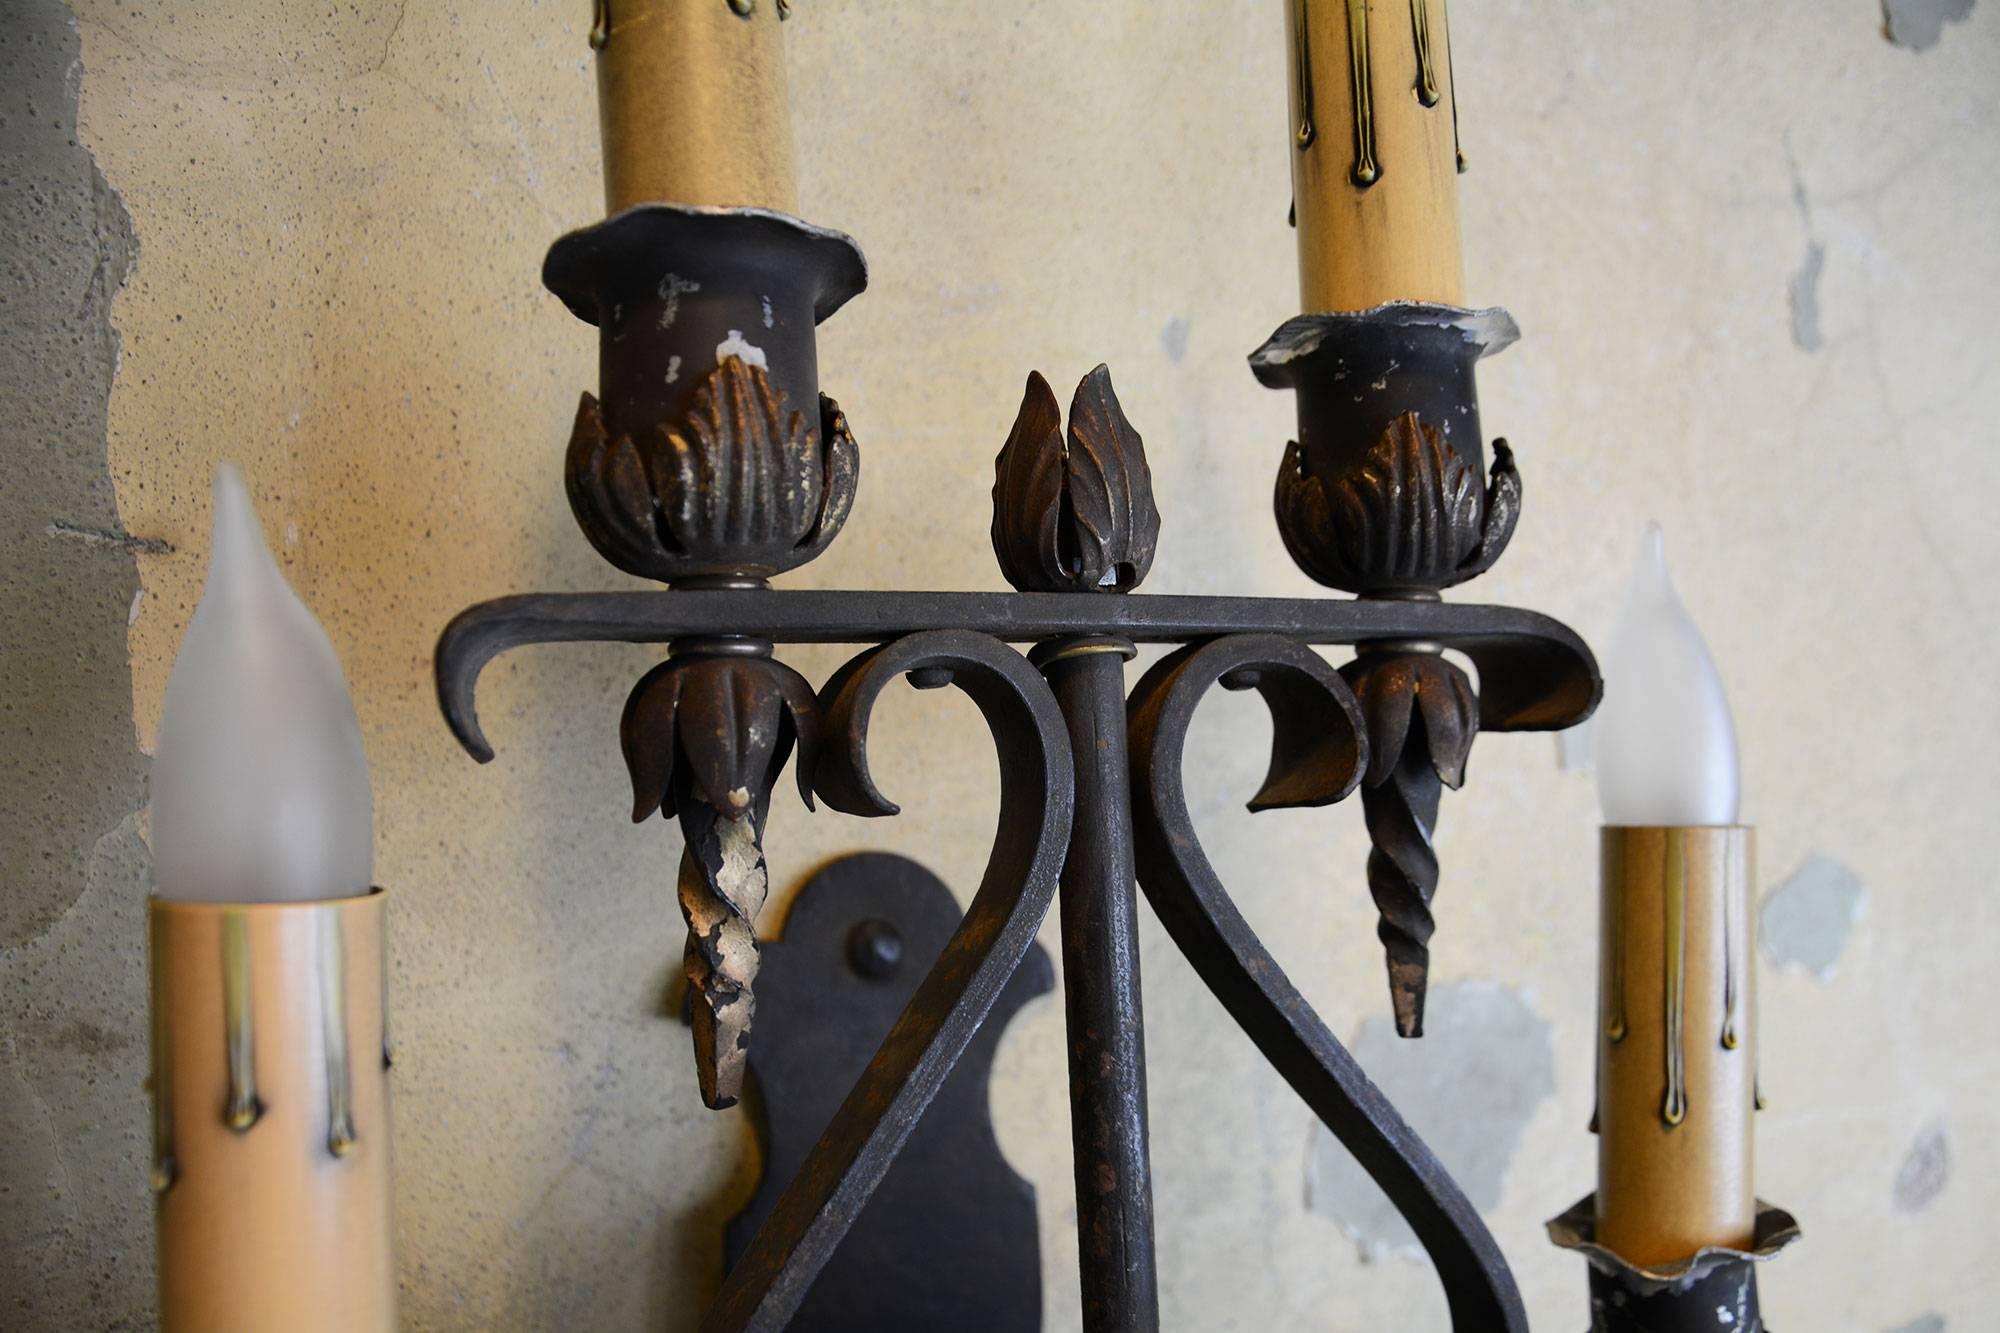 These four candle iron Tudor sconces with brass finials can make your door way bright and elegant. Great details and size with original patina,

circa 1920
Condition: Good
Finish: Original
Country of origin: USA
Measures: 37